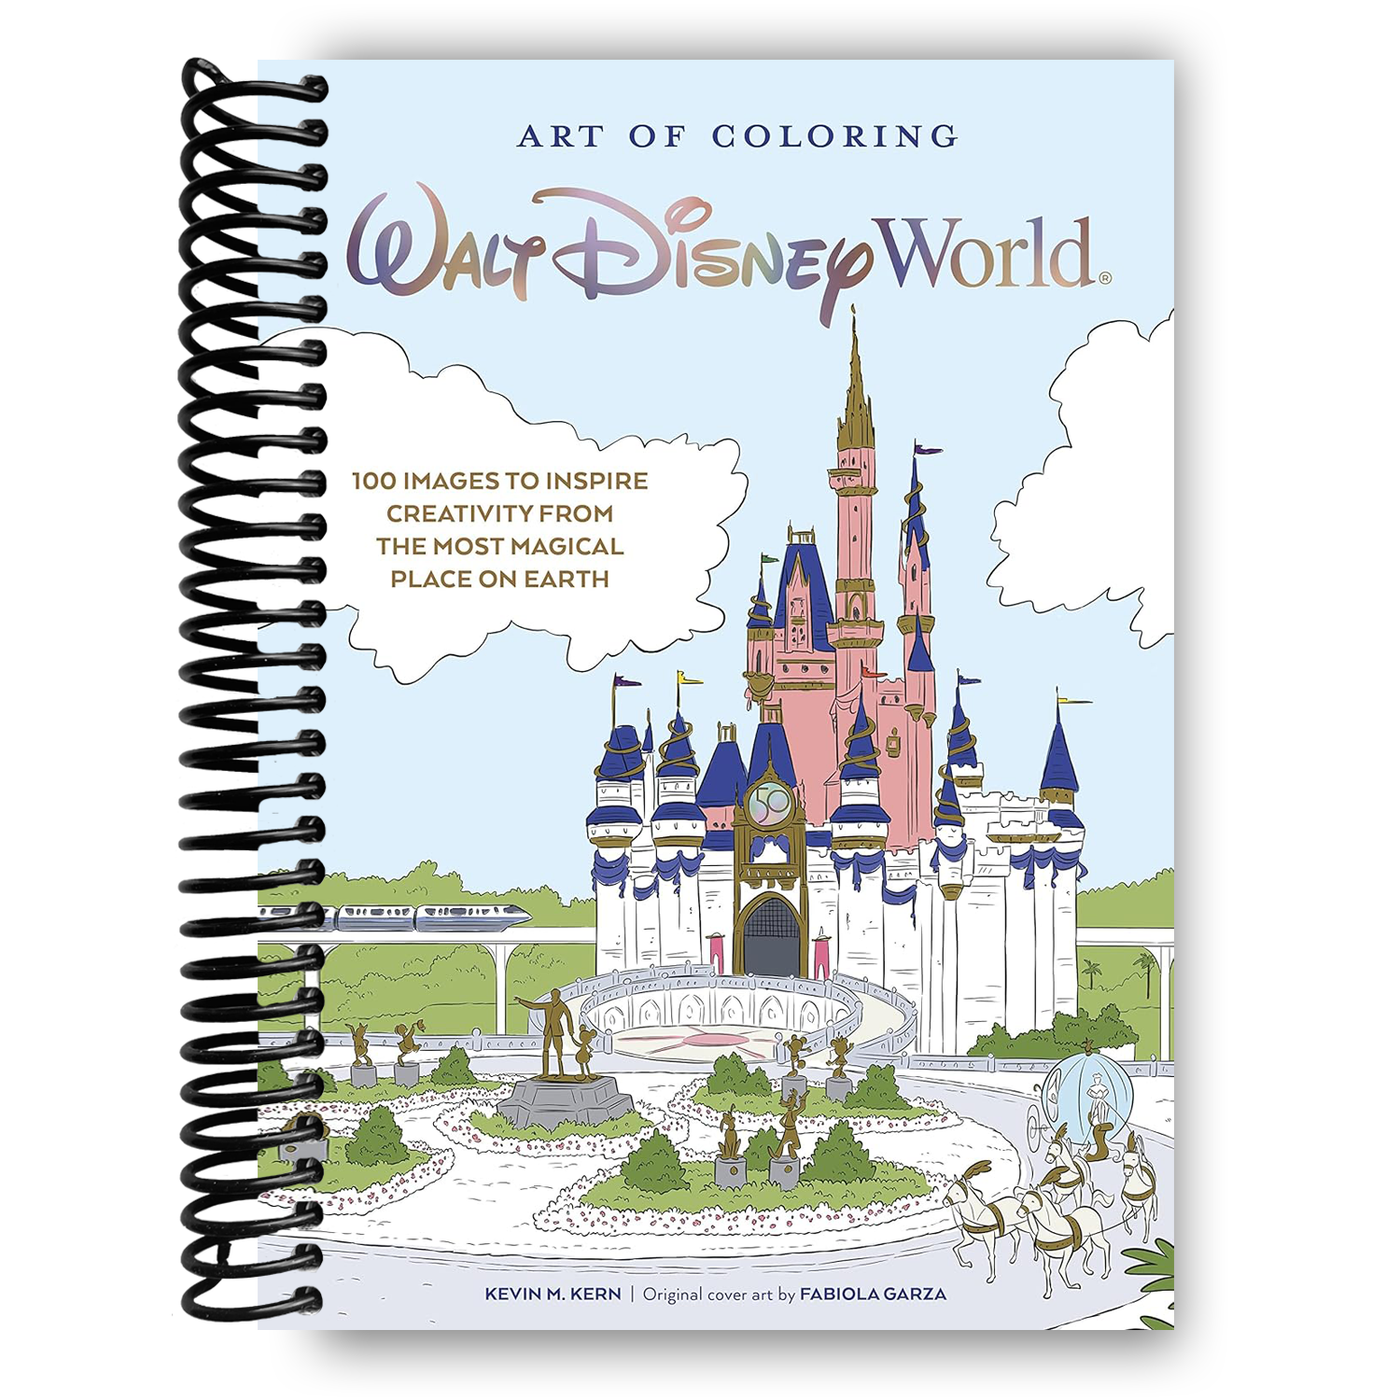 Art of Coloring: Walt Disney World: 100 Images to Inspire Creativity from The Most Magical Place on Earth (Spiral Bound)